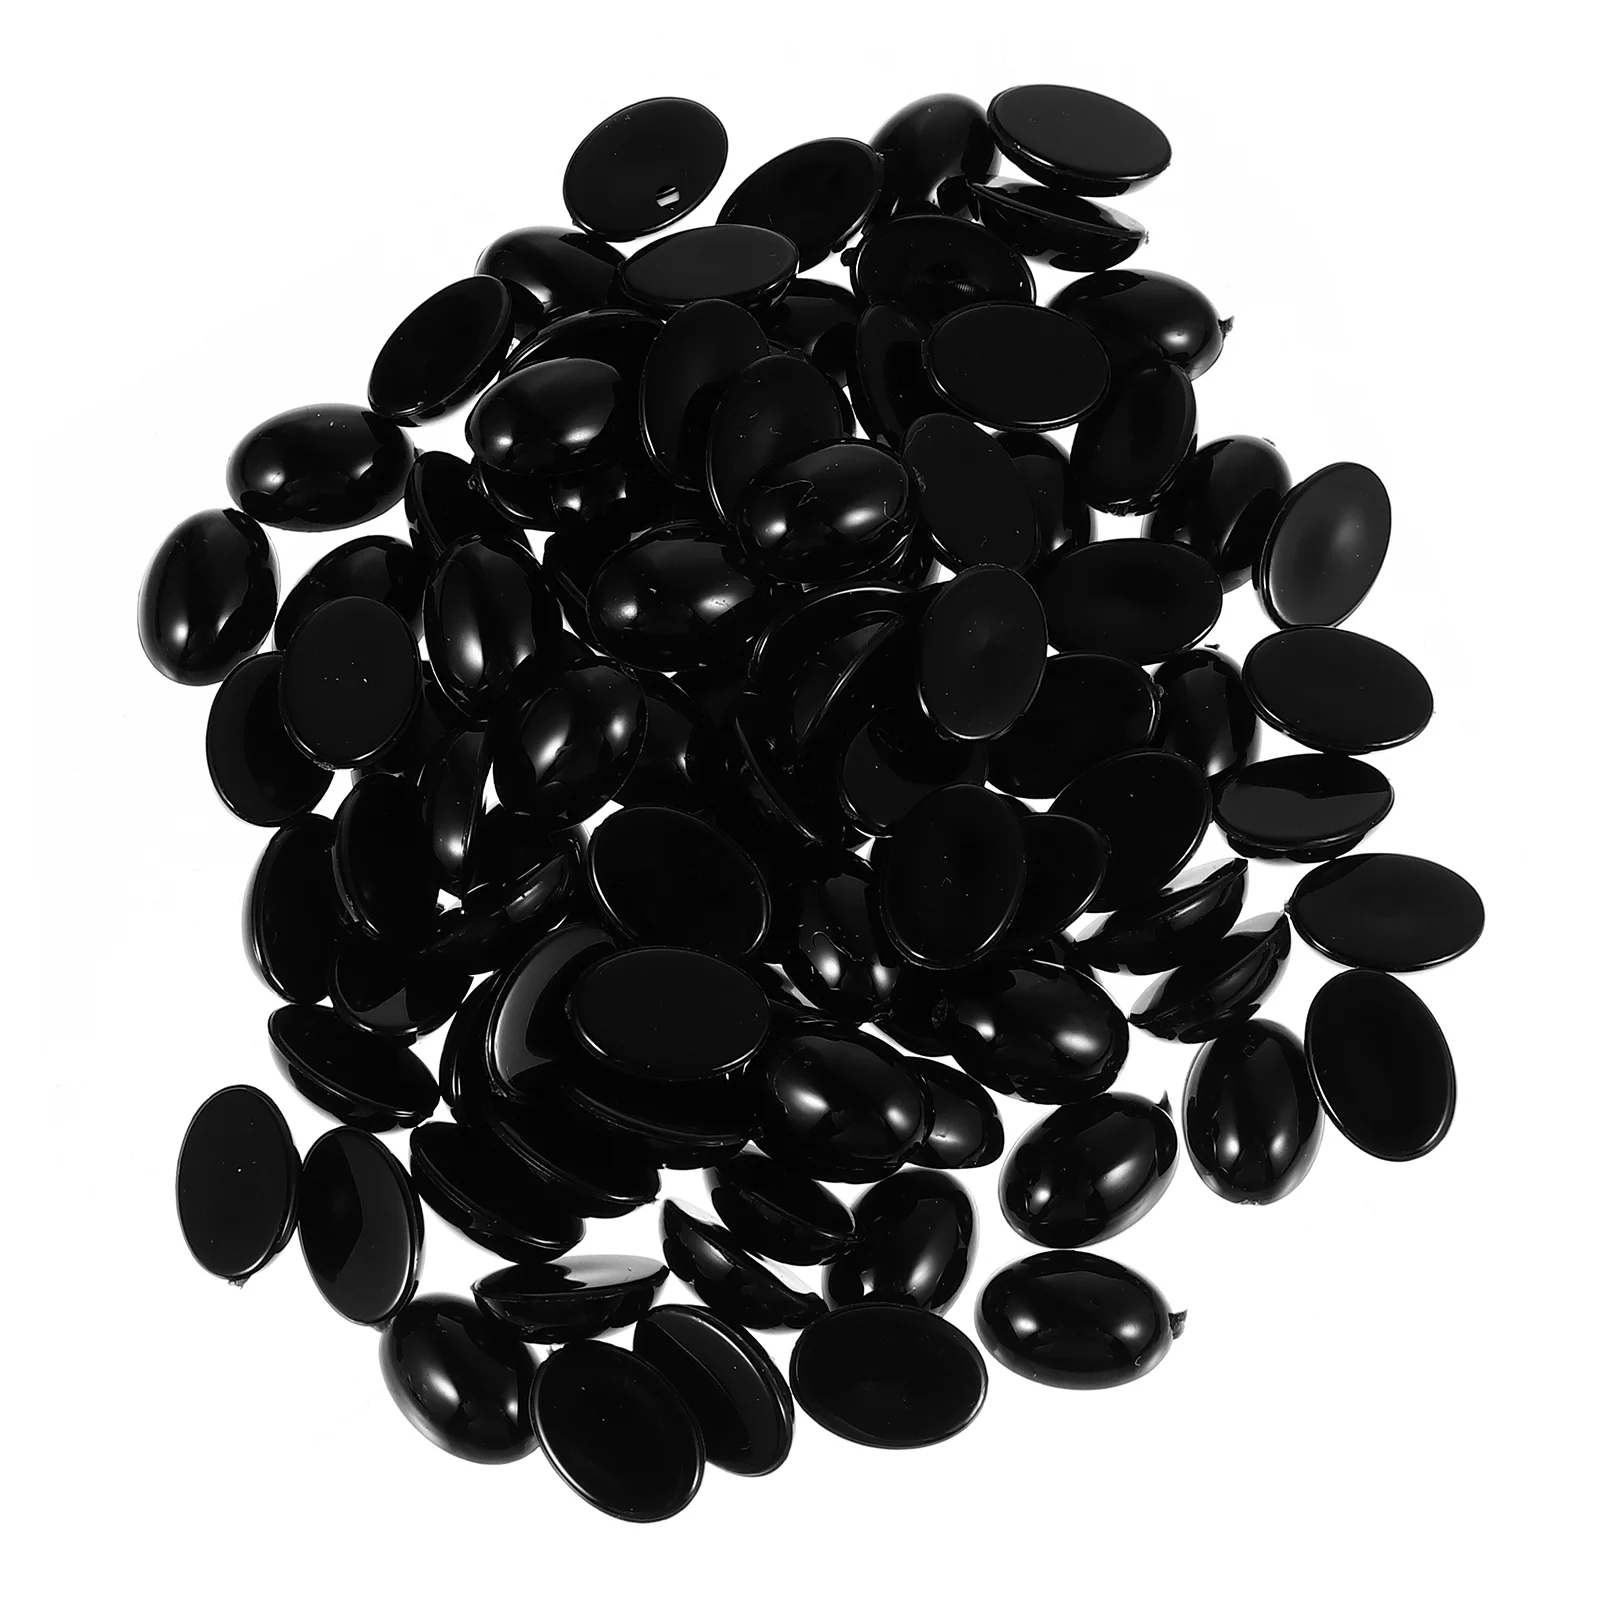 

100 Pcs Black Baby Toy Nose DIY Materials Plastic Eyes Decorative Oval for Bear